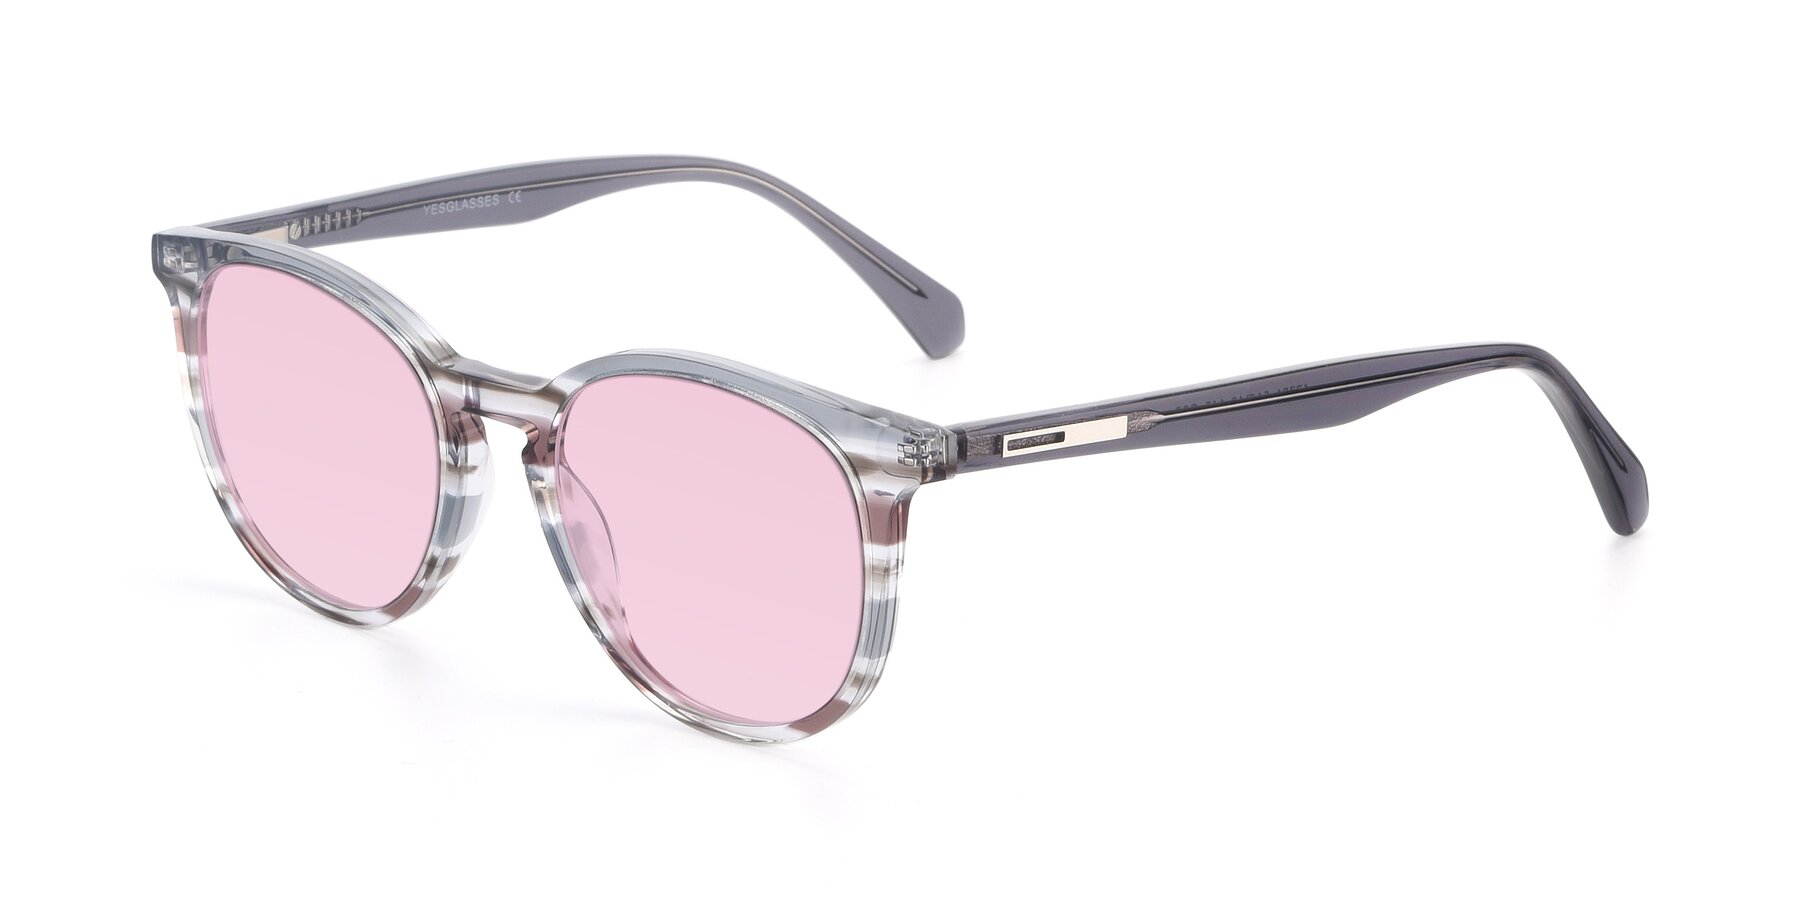 Angle of 17721 in Stripe Grey with Light Pink Tinted Lenses